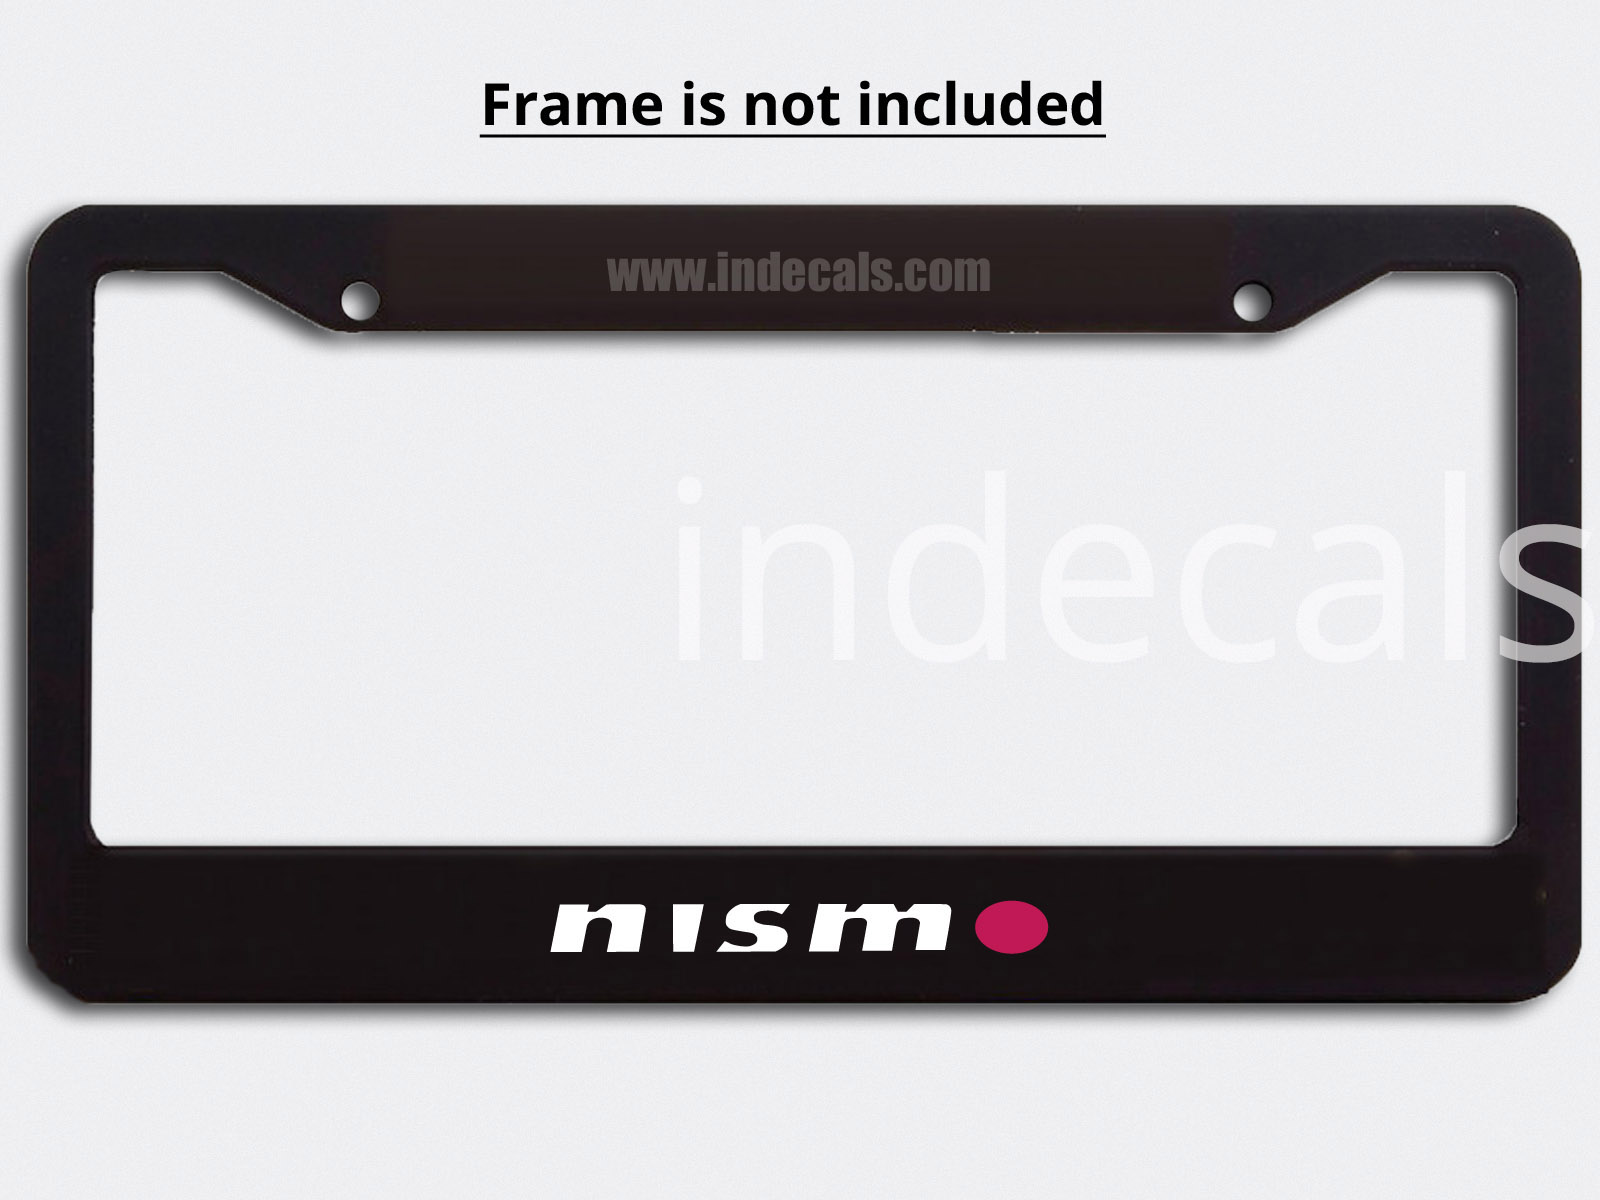 3 x Nismo Stickers for Plate Frame - White